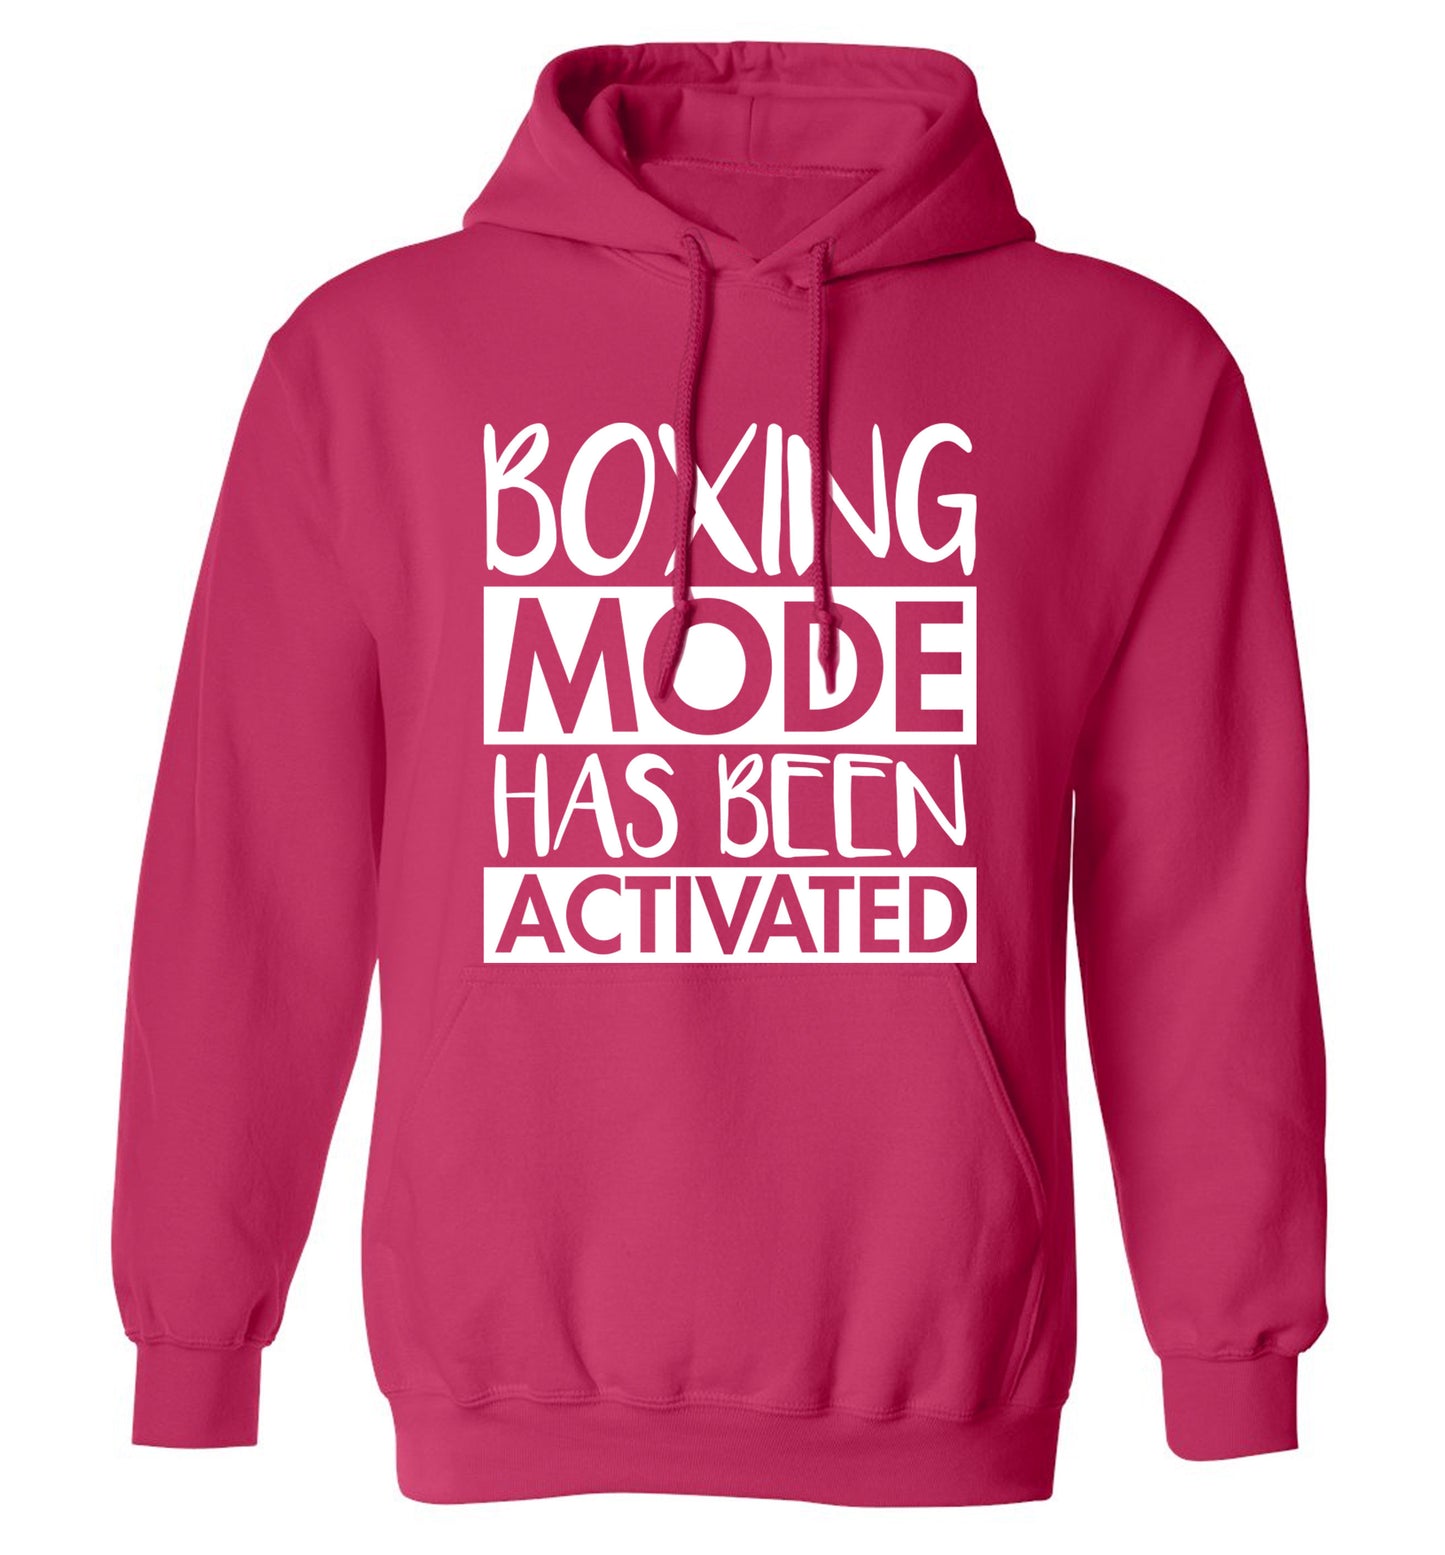 Boxing mode activated adults unisex pink hoodie 2XL